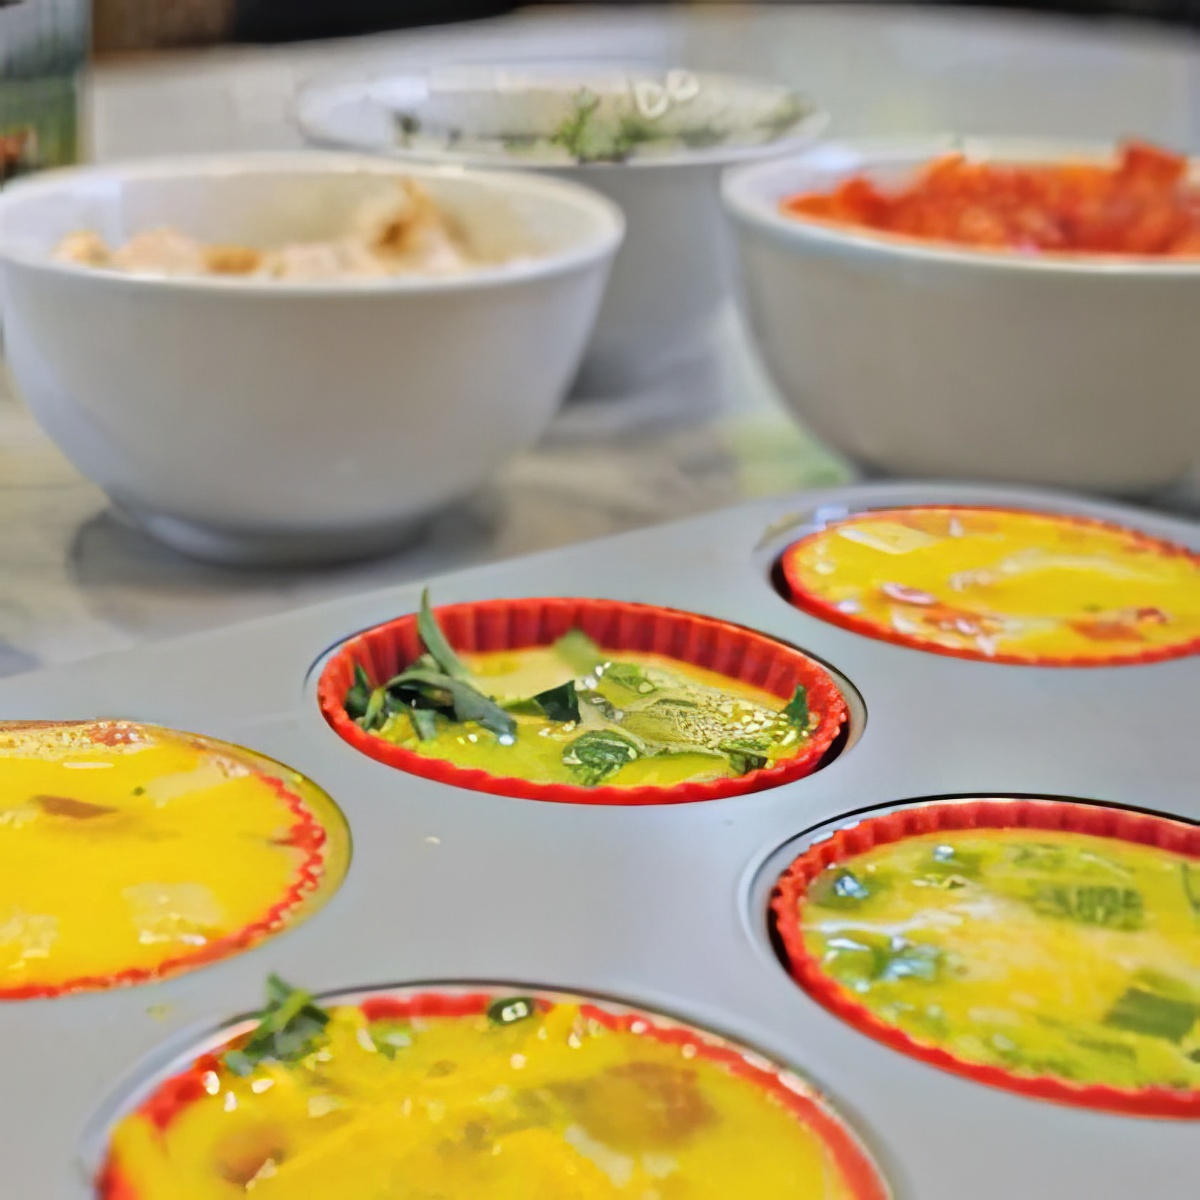 Check out this super yummy omelet bar recipe with your kids!